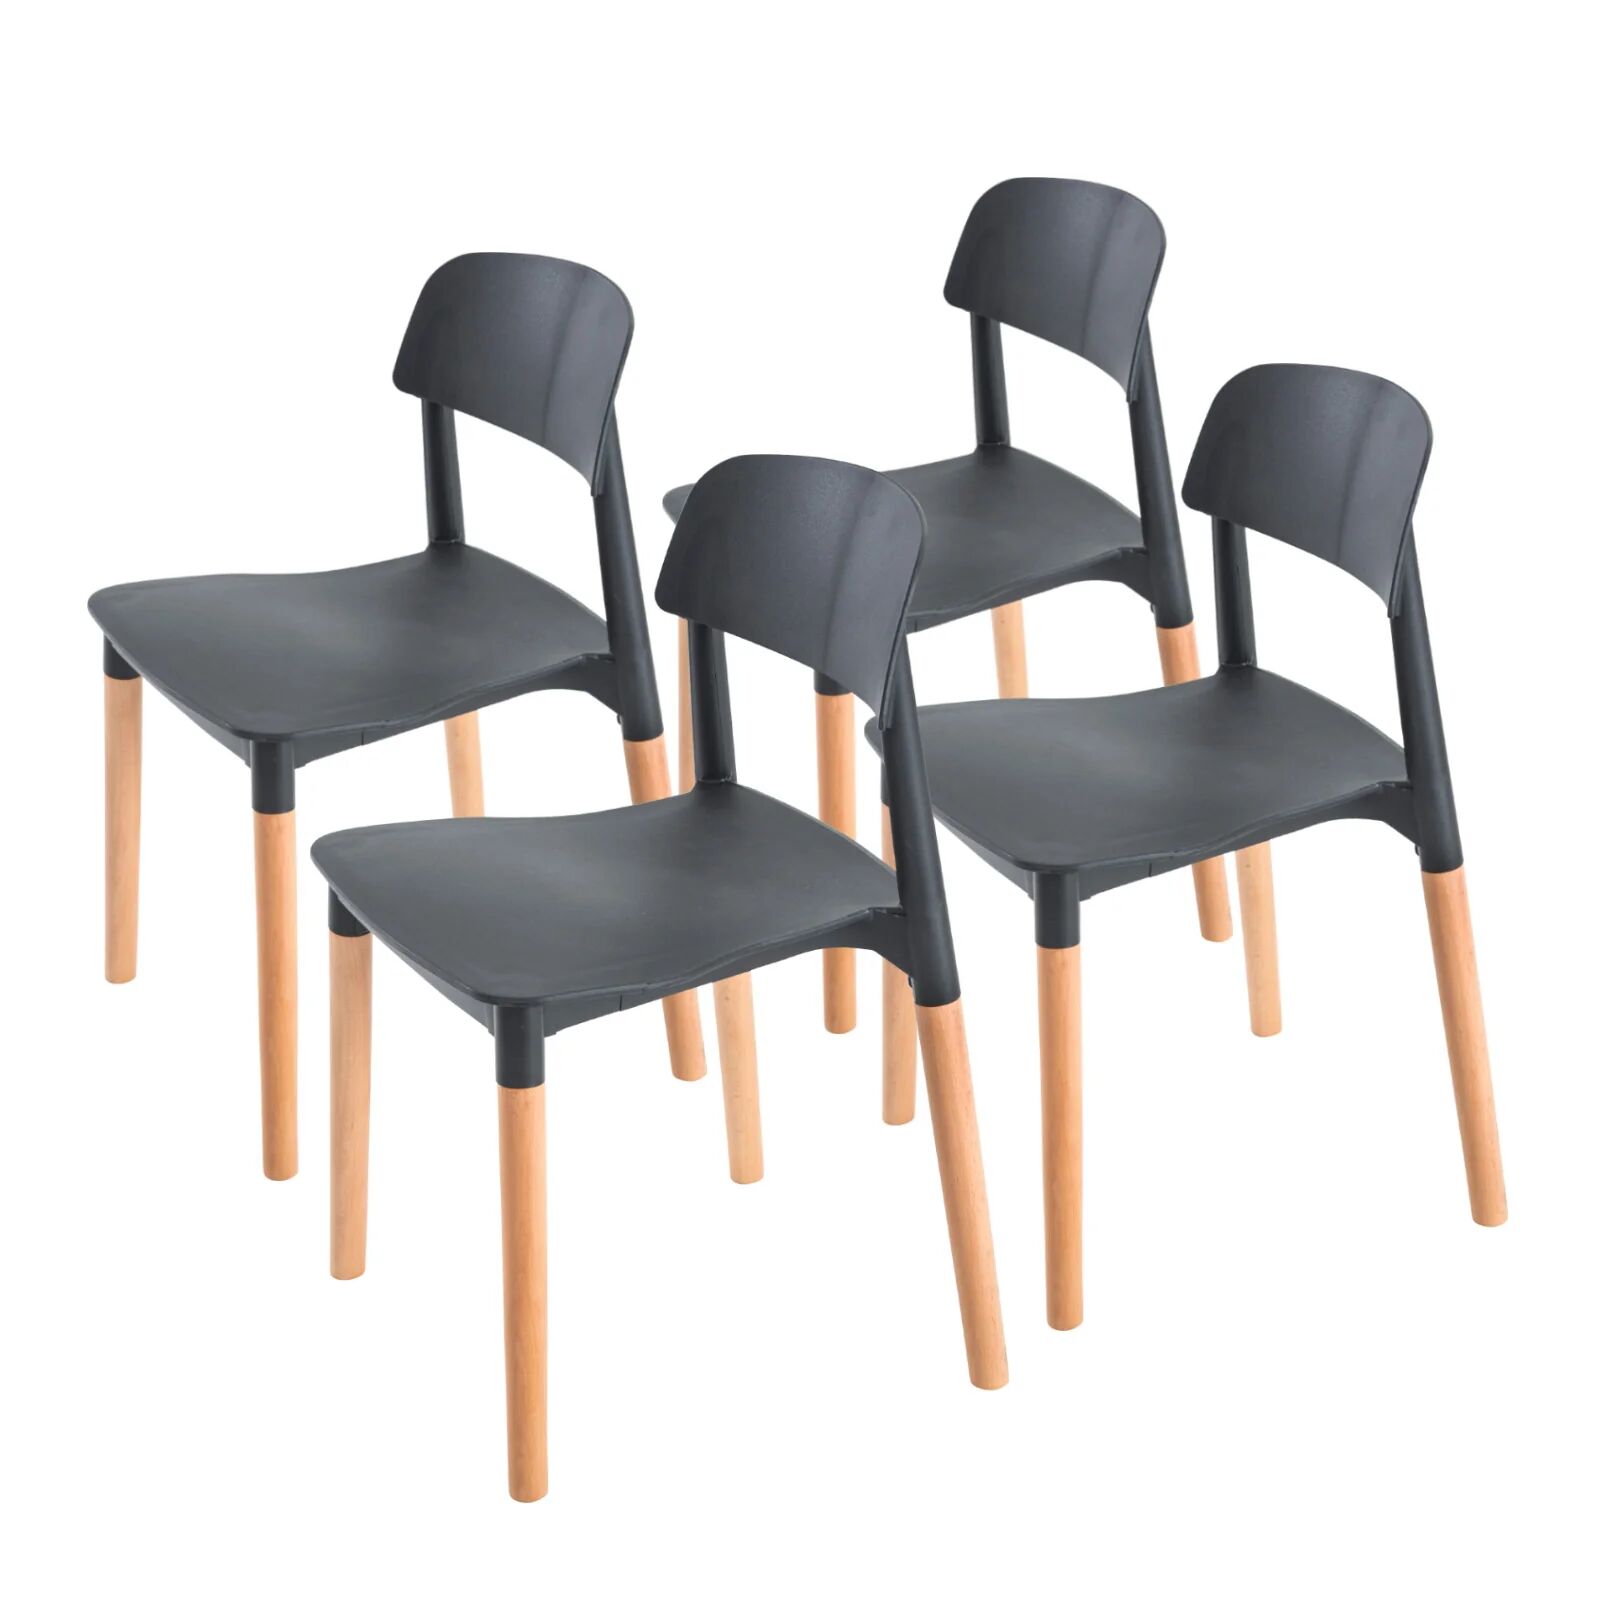 Unbranded Belloch Stackable Dining Chairs (4 Pcs) - Black